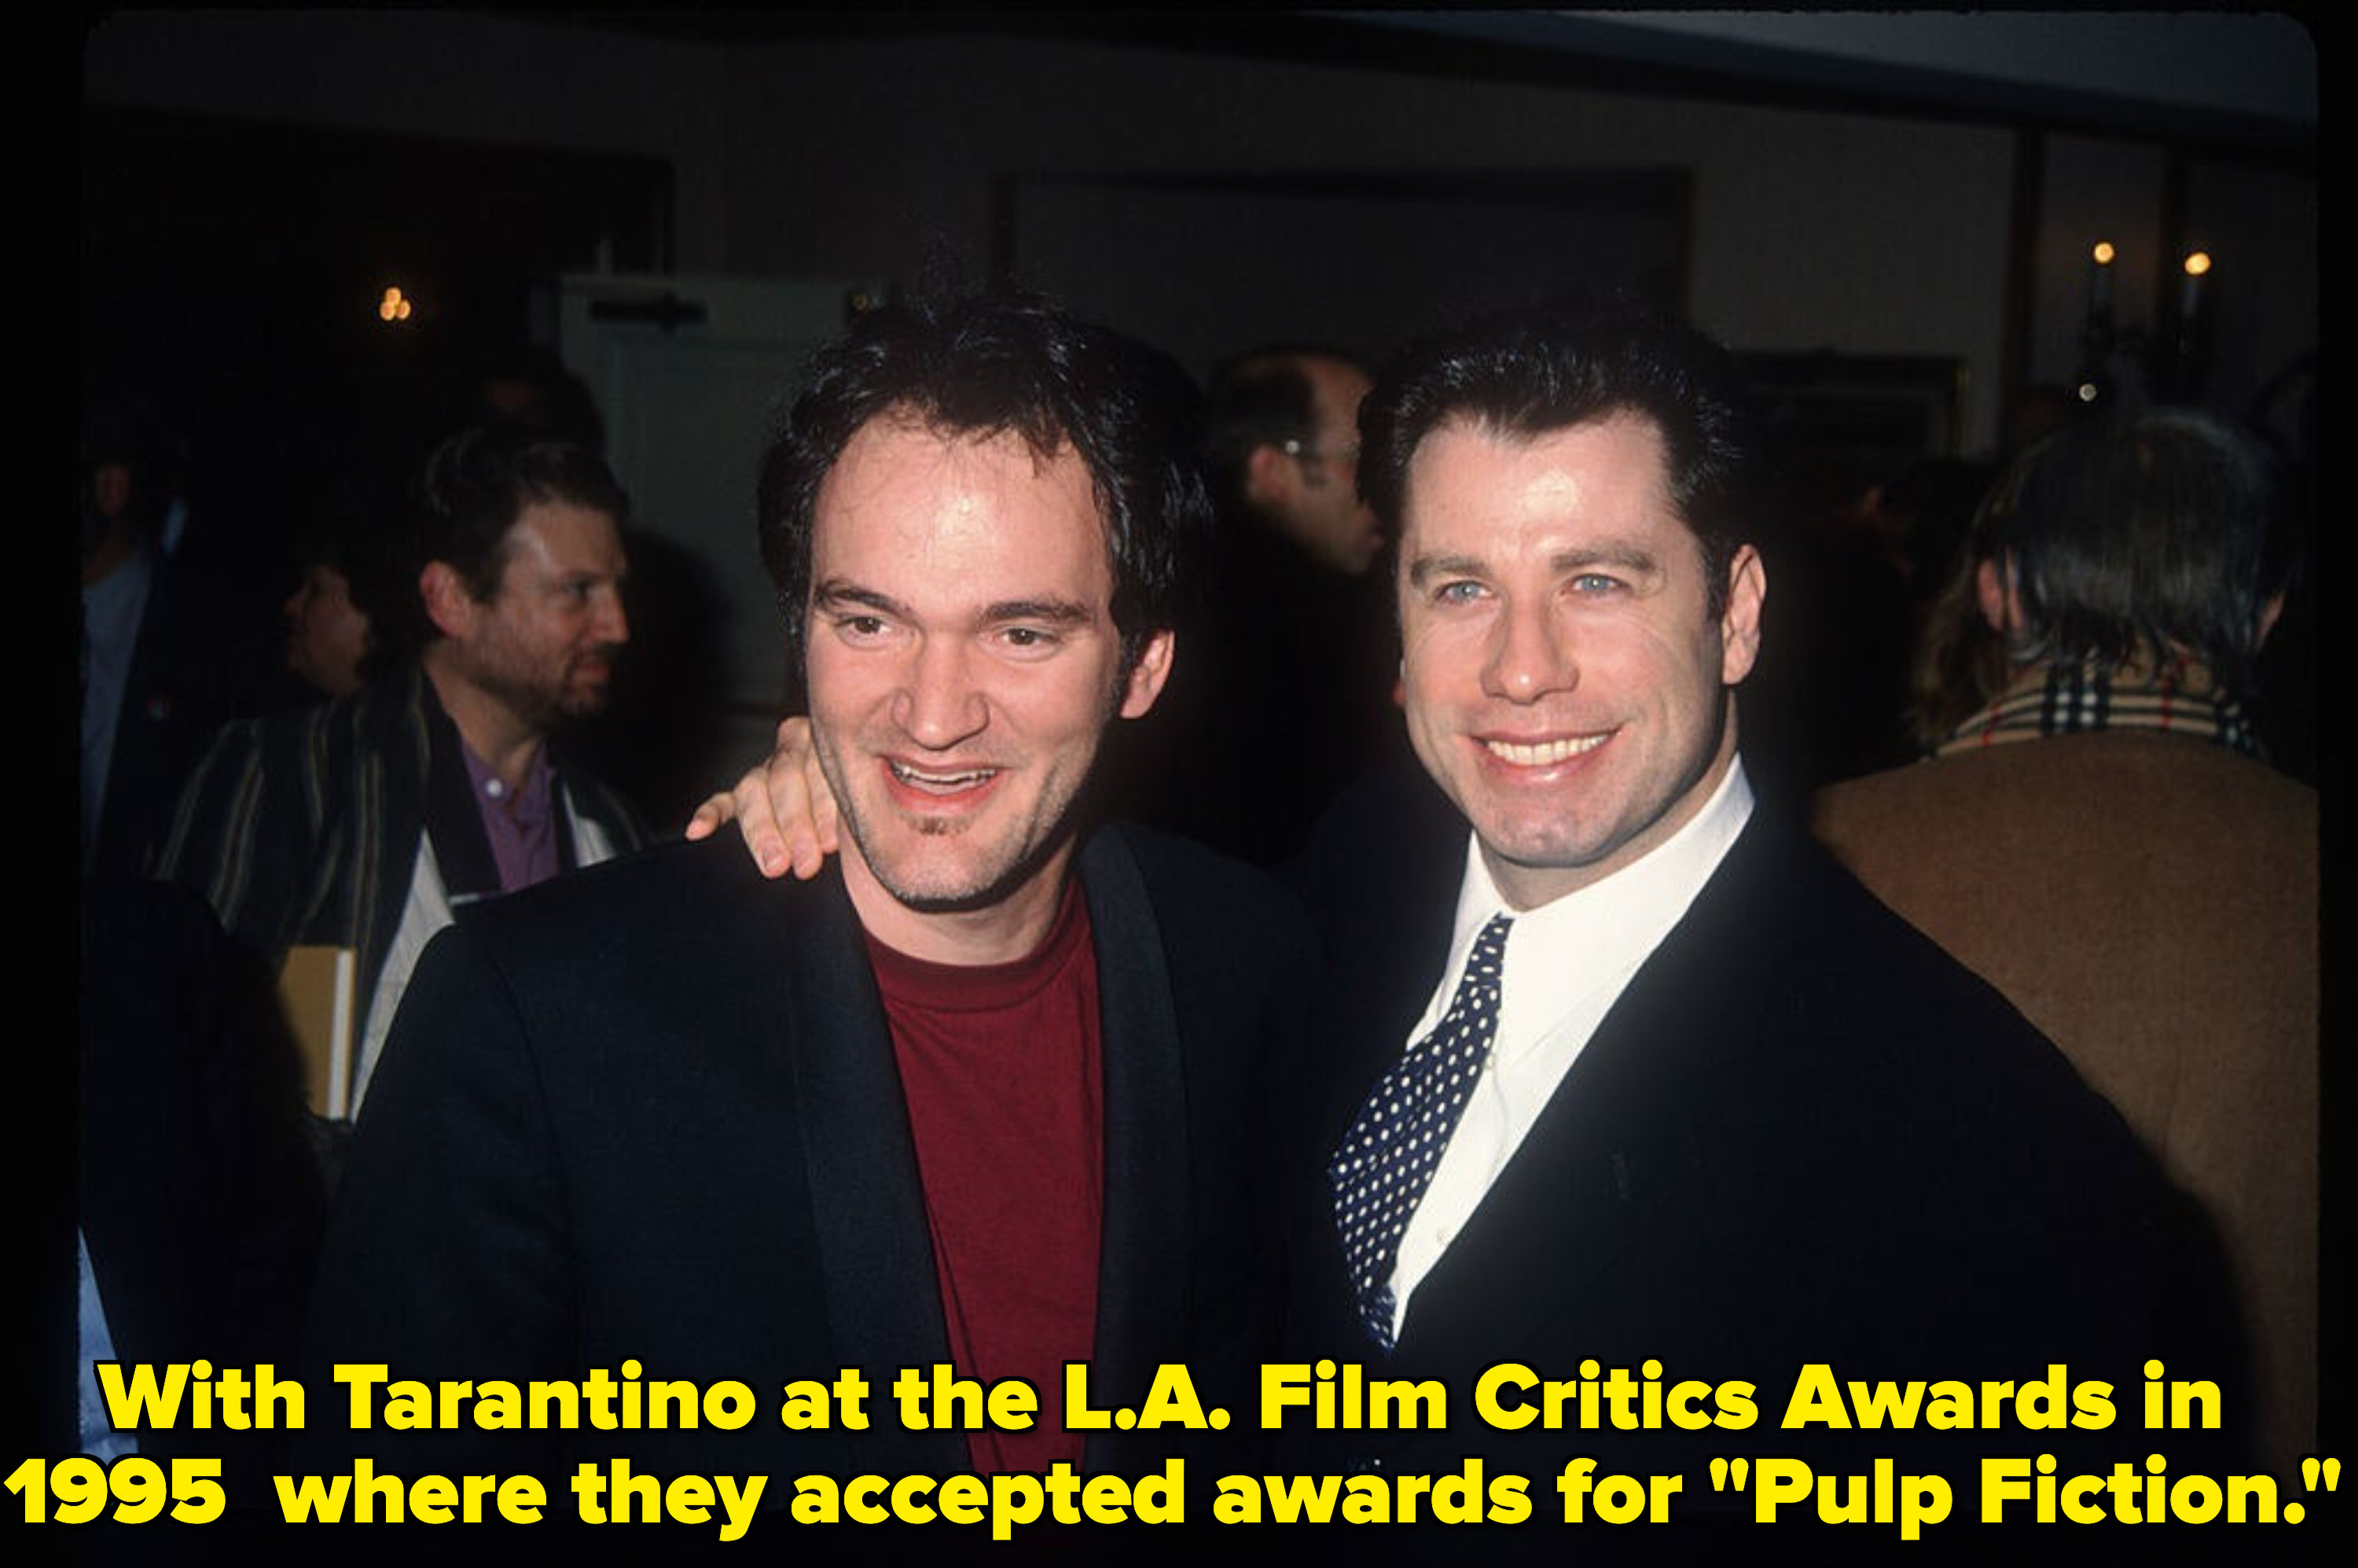 Quentin Tarantino and Travolta smile together at an event